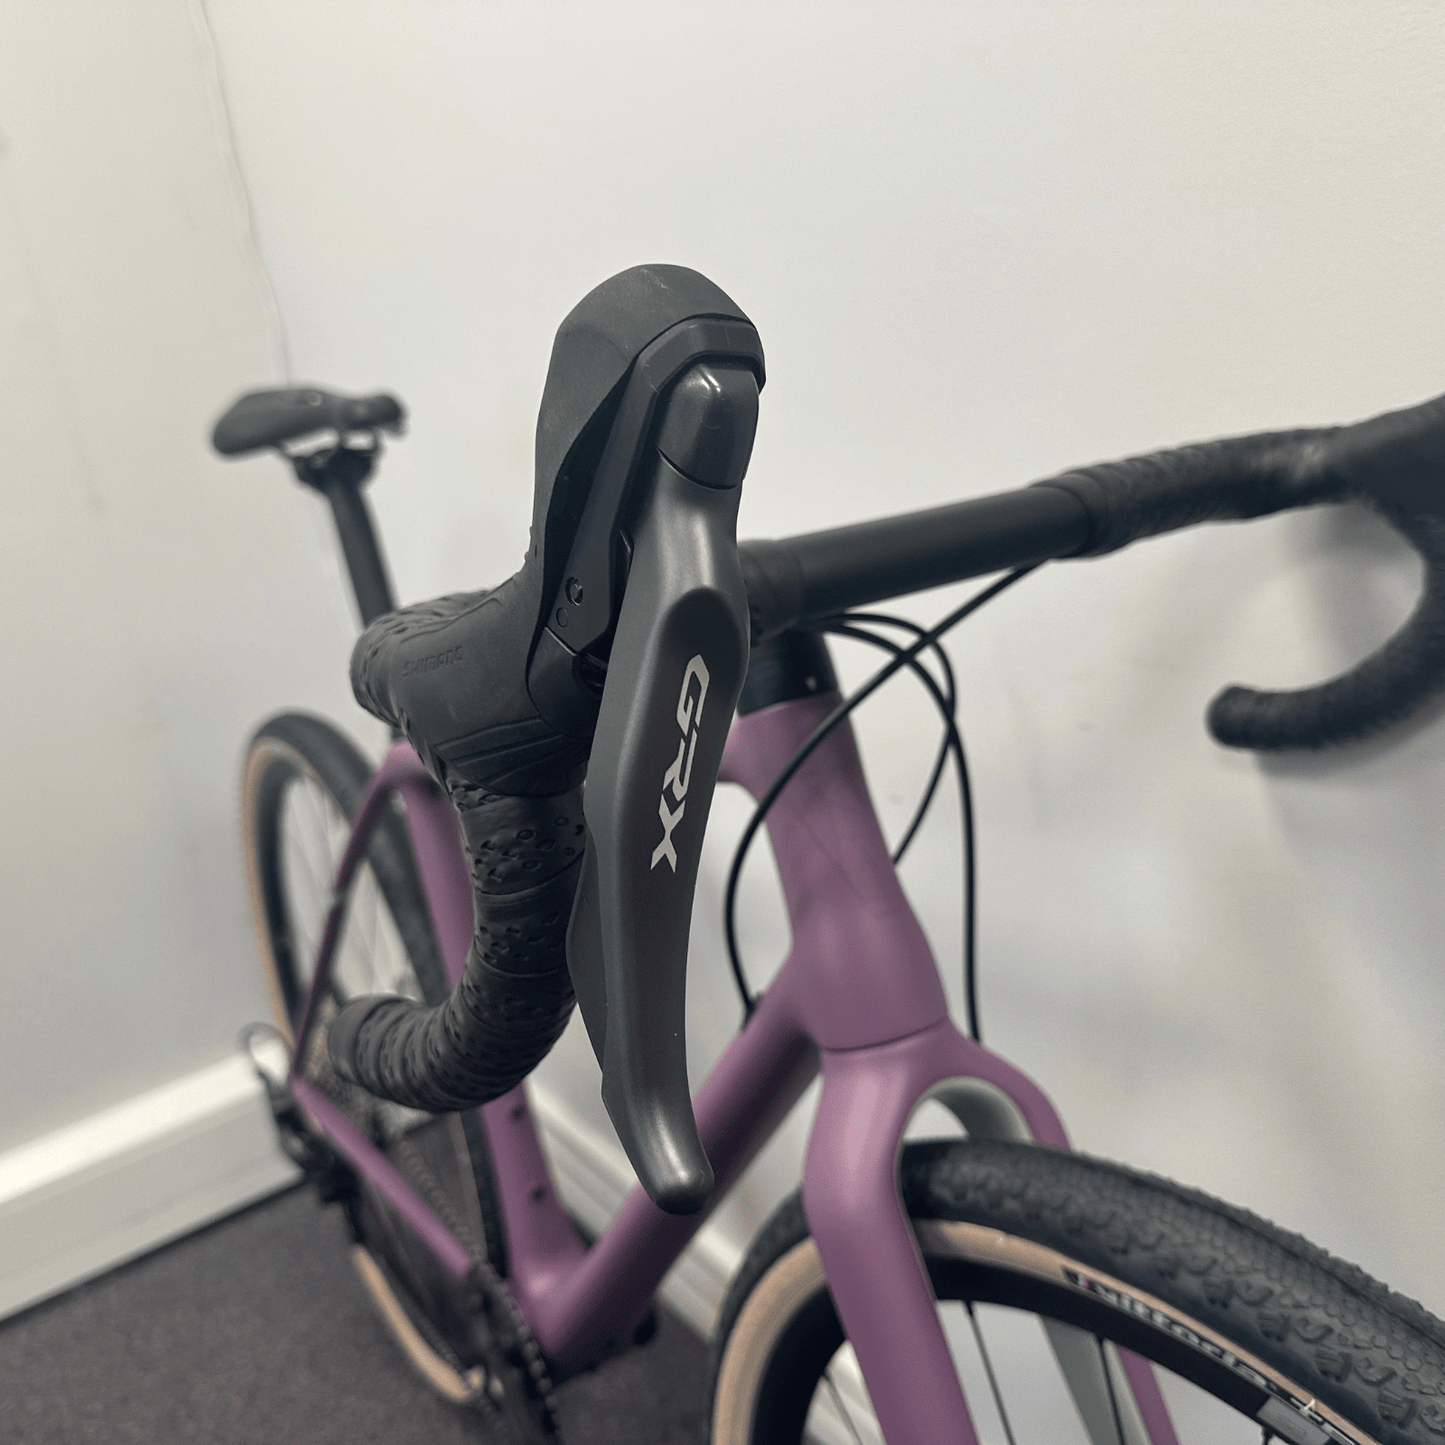 Vielo V+1 Medium Plum with Shimano GRX and DT Swiss GR1600 wheels